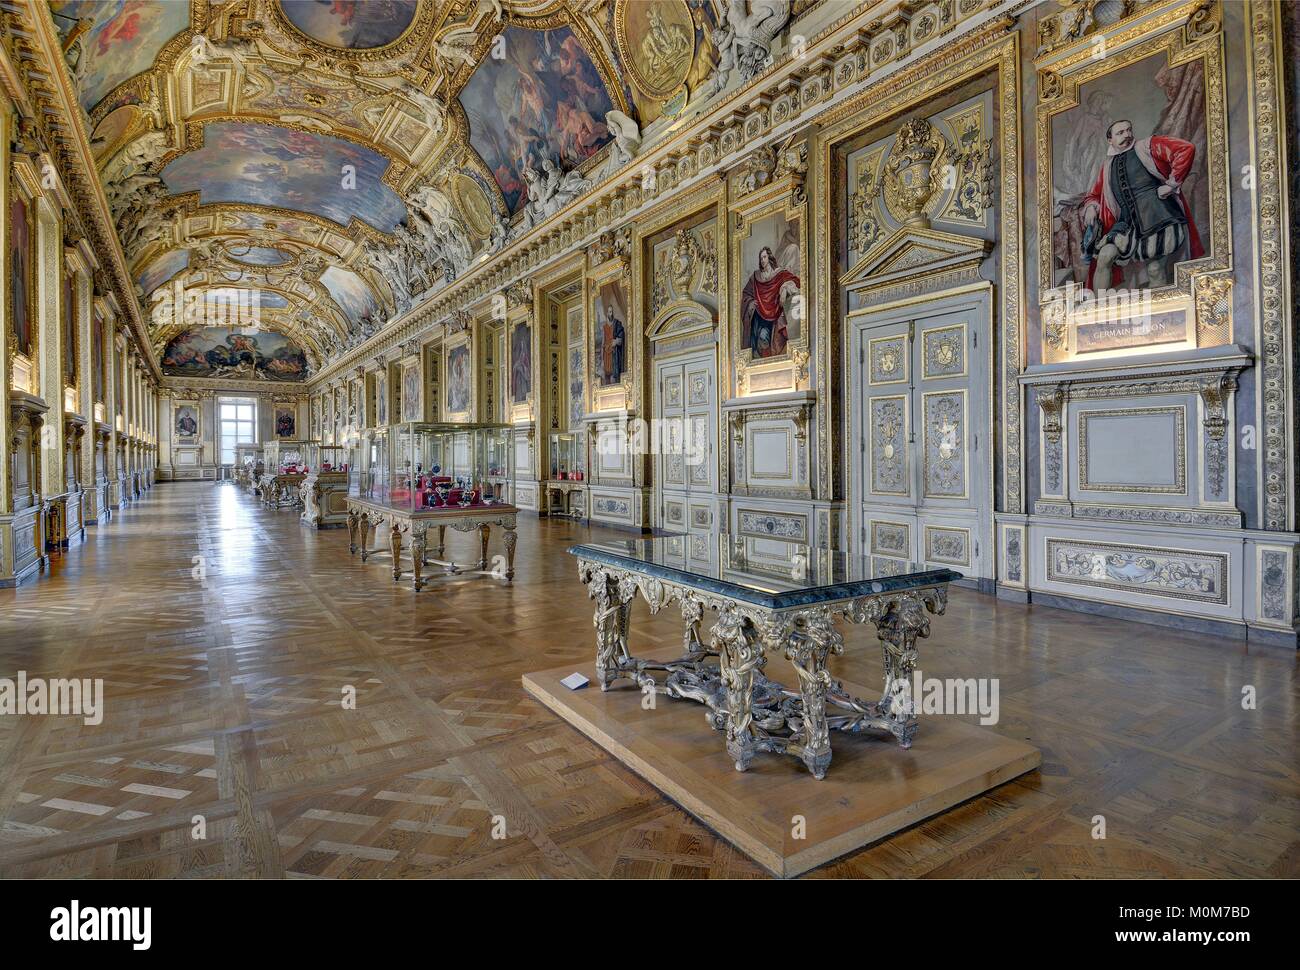 France,Paris,Louvre museum,decorative arts department,Apollo gallery,built from 1661 by architect Louis Le Vau and designer Charles Le Brun and completed in 1861 Stock Photo